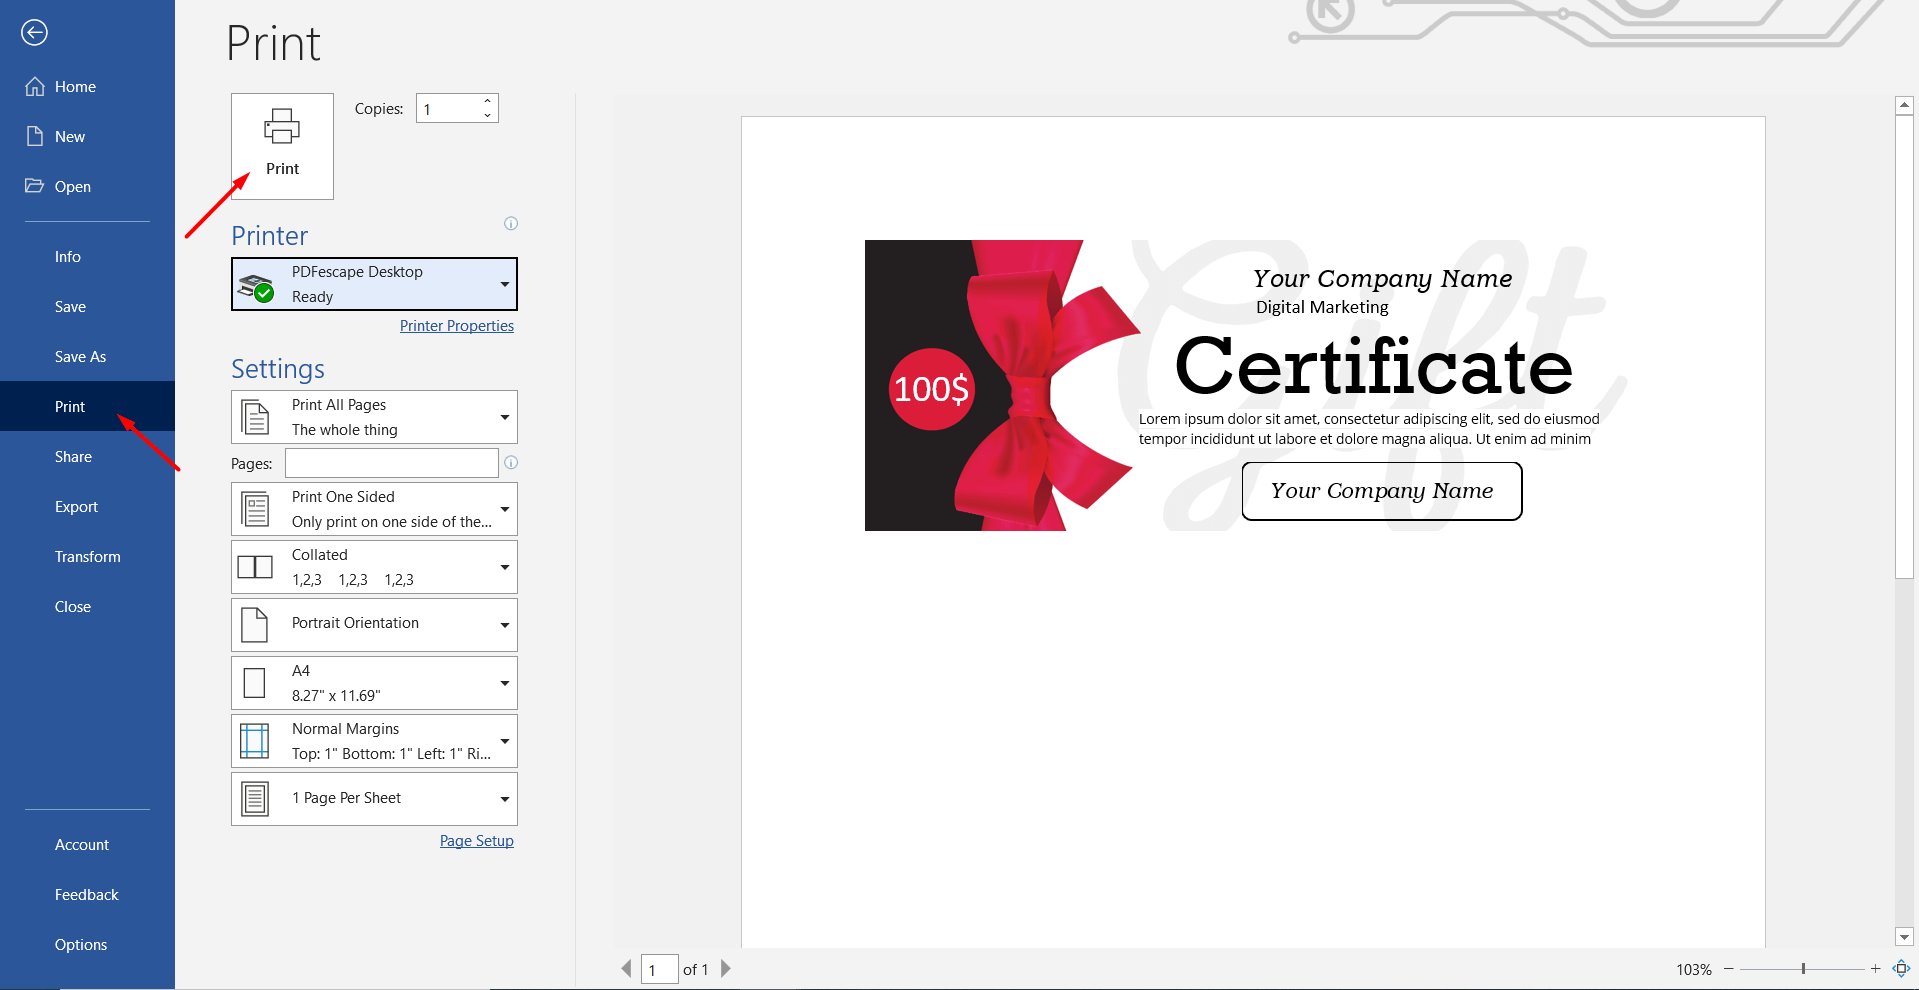 How to Print Gift Certificate in Ms Word